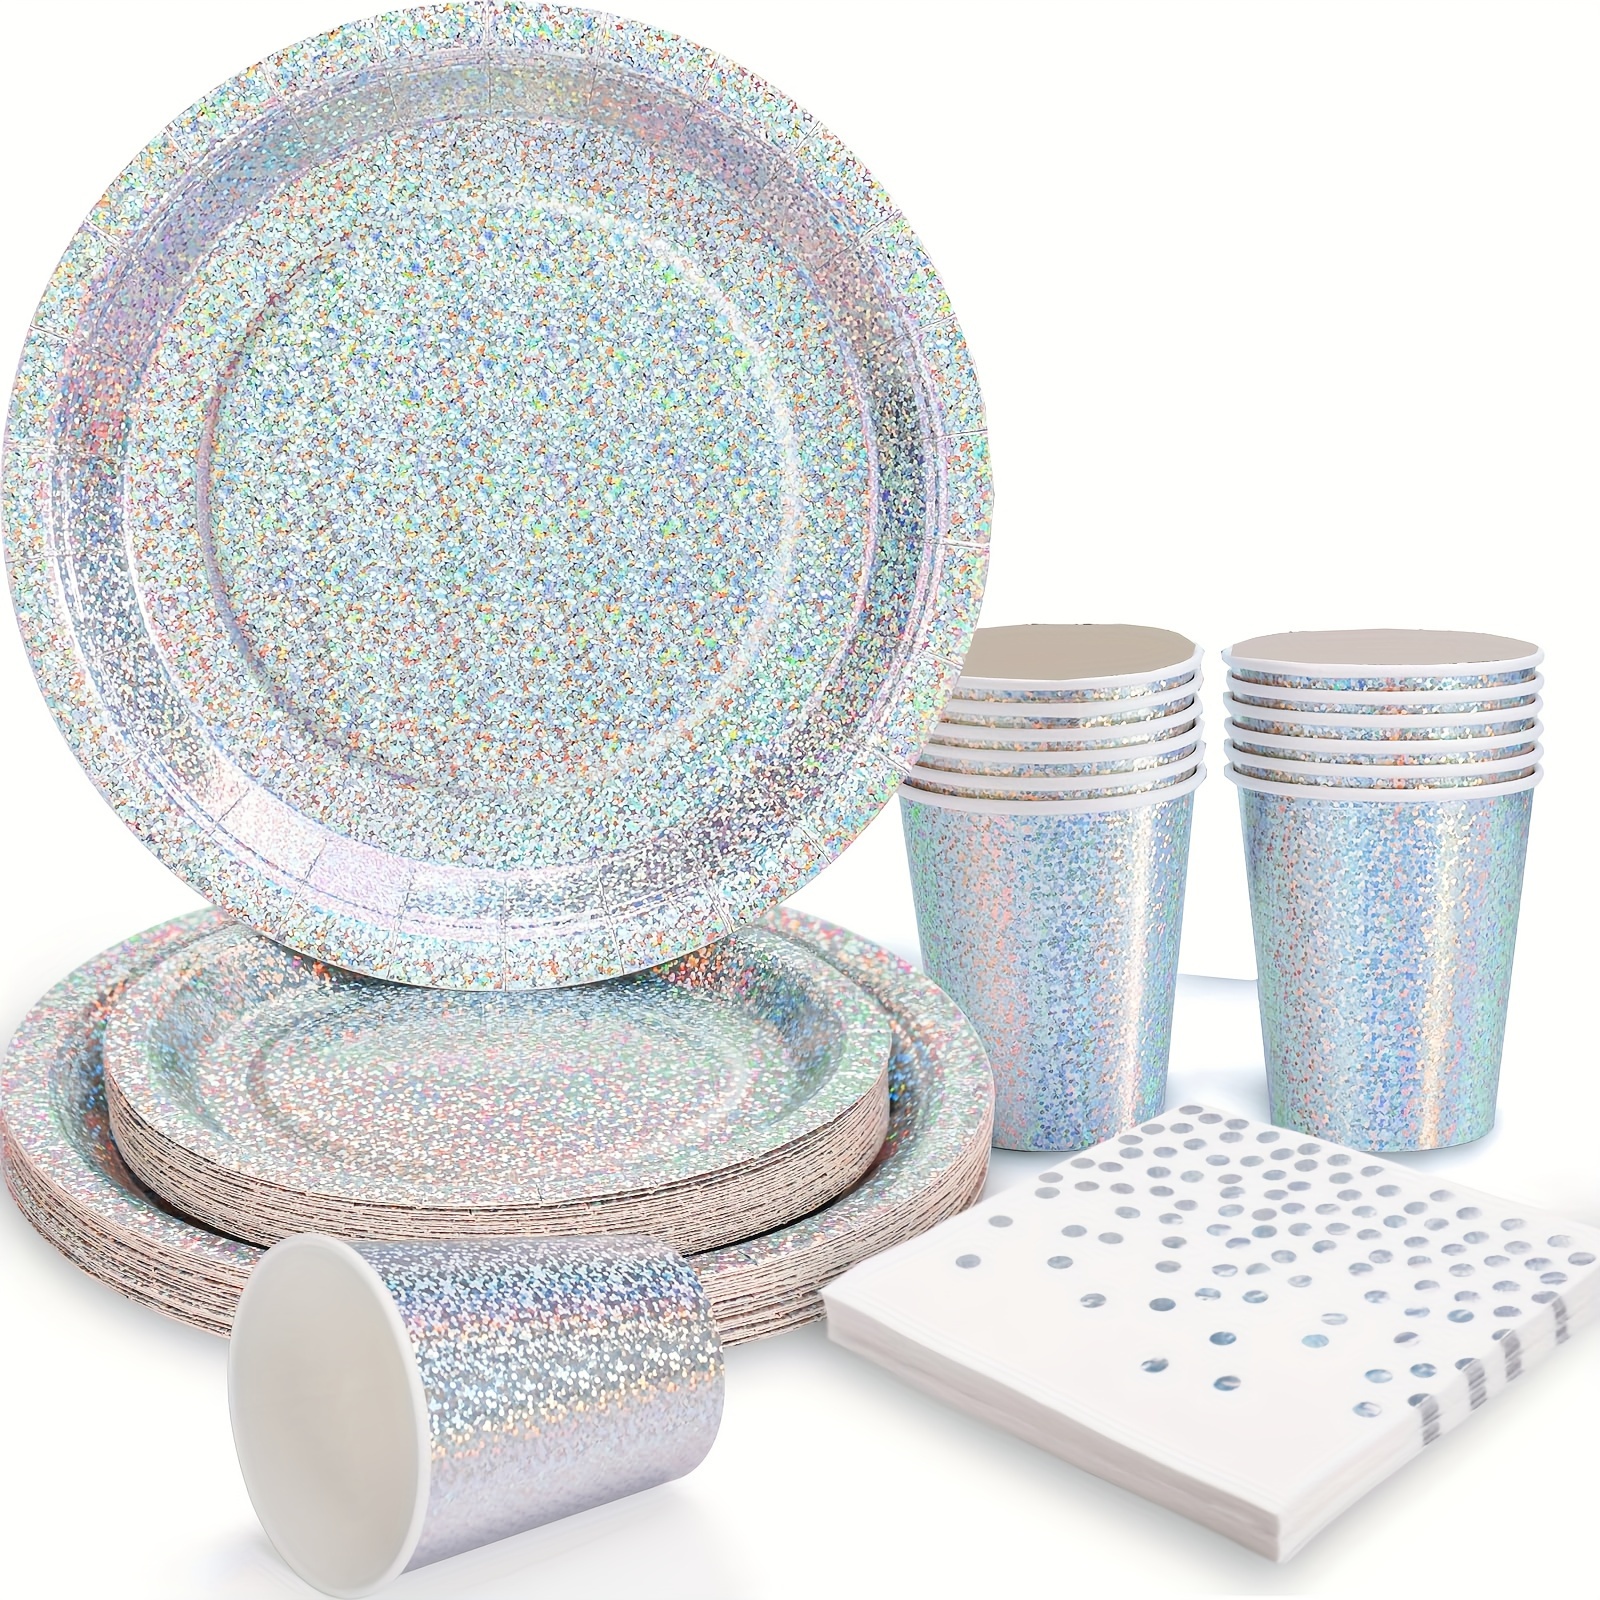 

40pcs Iridescent Plates Party Supplies, Iridescent Party Decorations Includes Holographic Plates, Silvery Dot Napkins And Silverware Set For Disco Music 90s Birthday Party Decorations